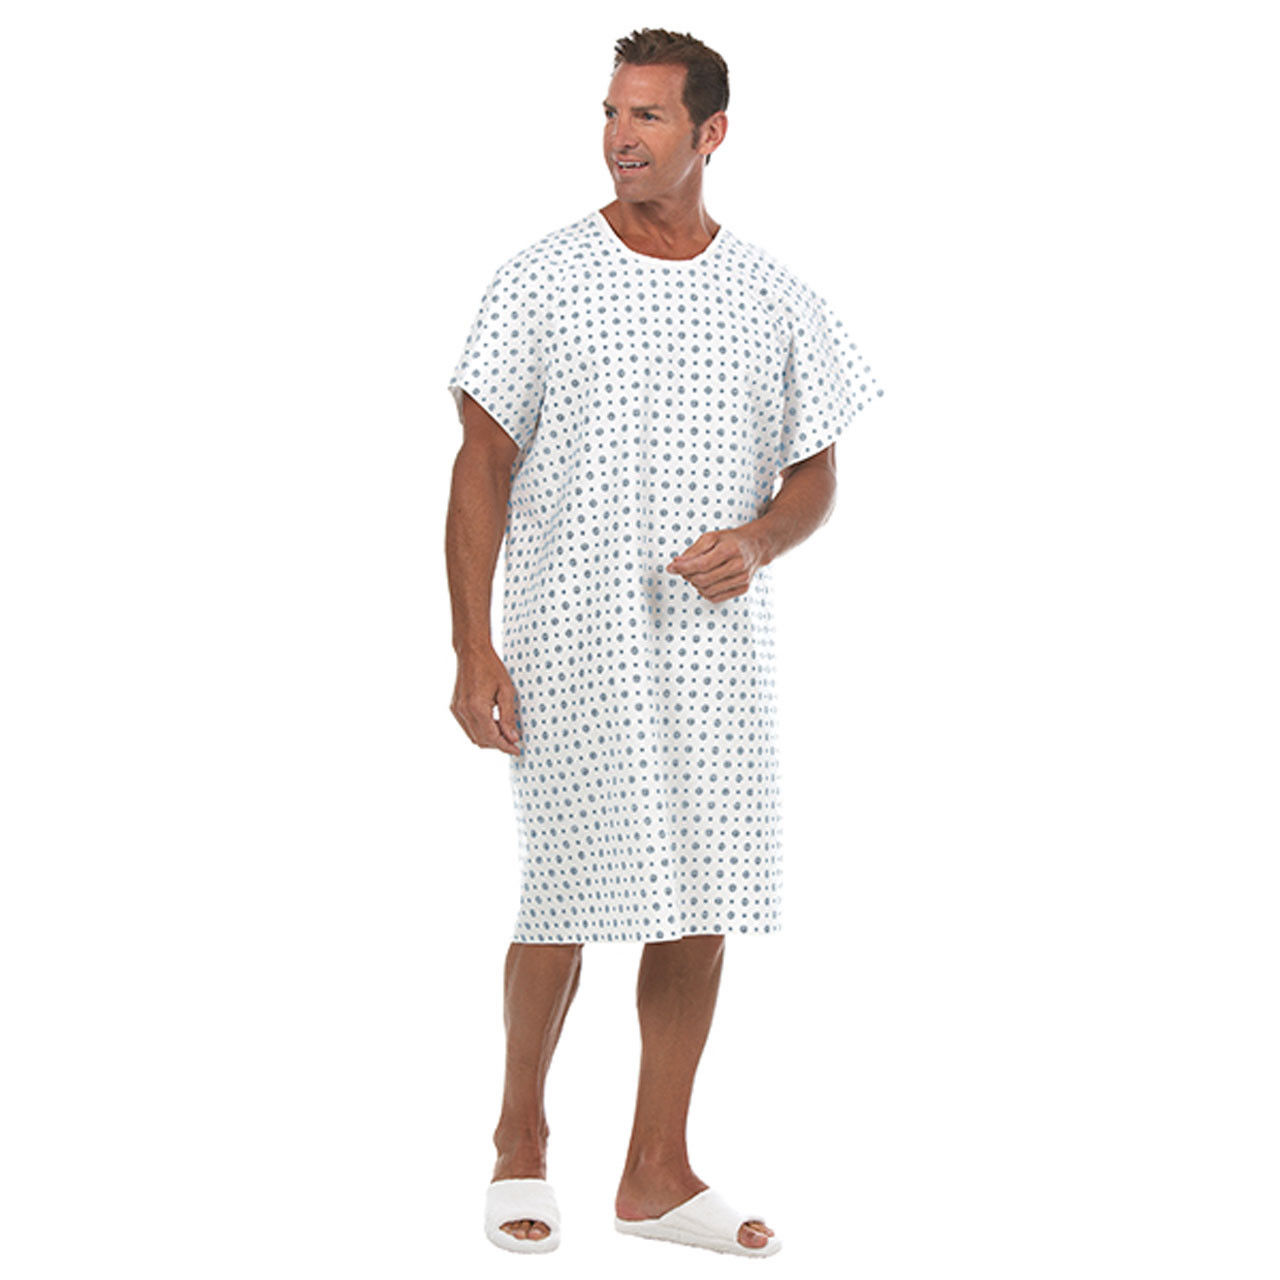 Is the cheapest surgical gown bulk suitable for prolonged use?